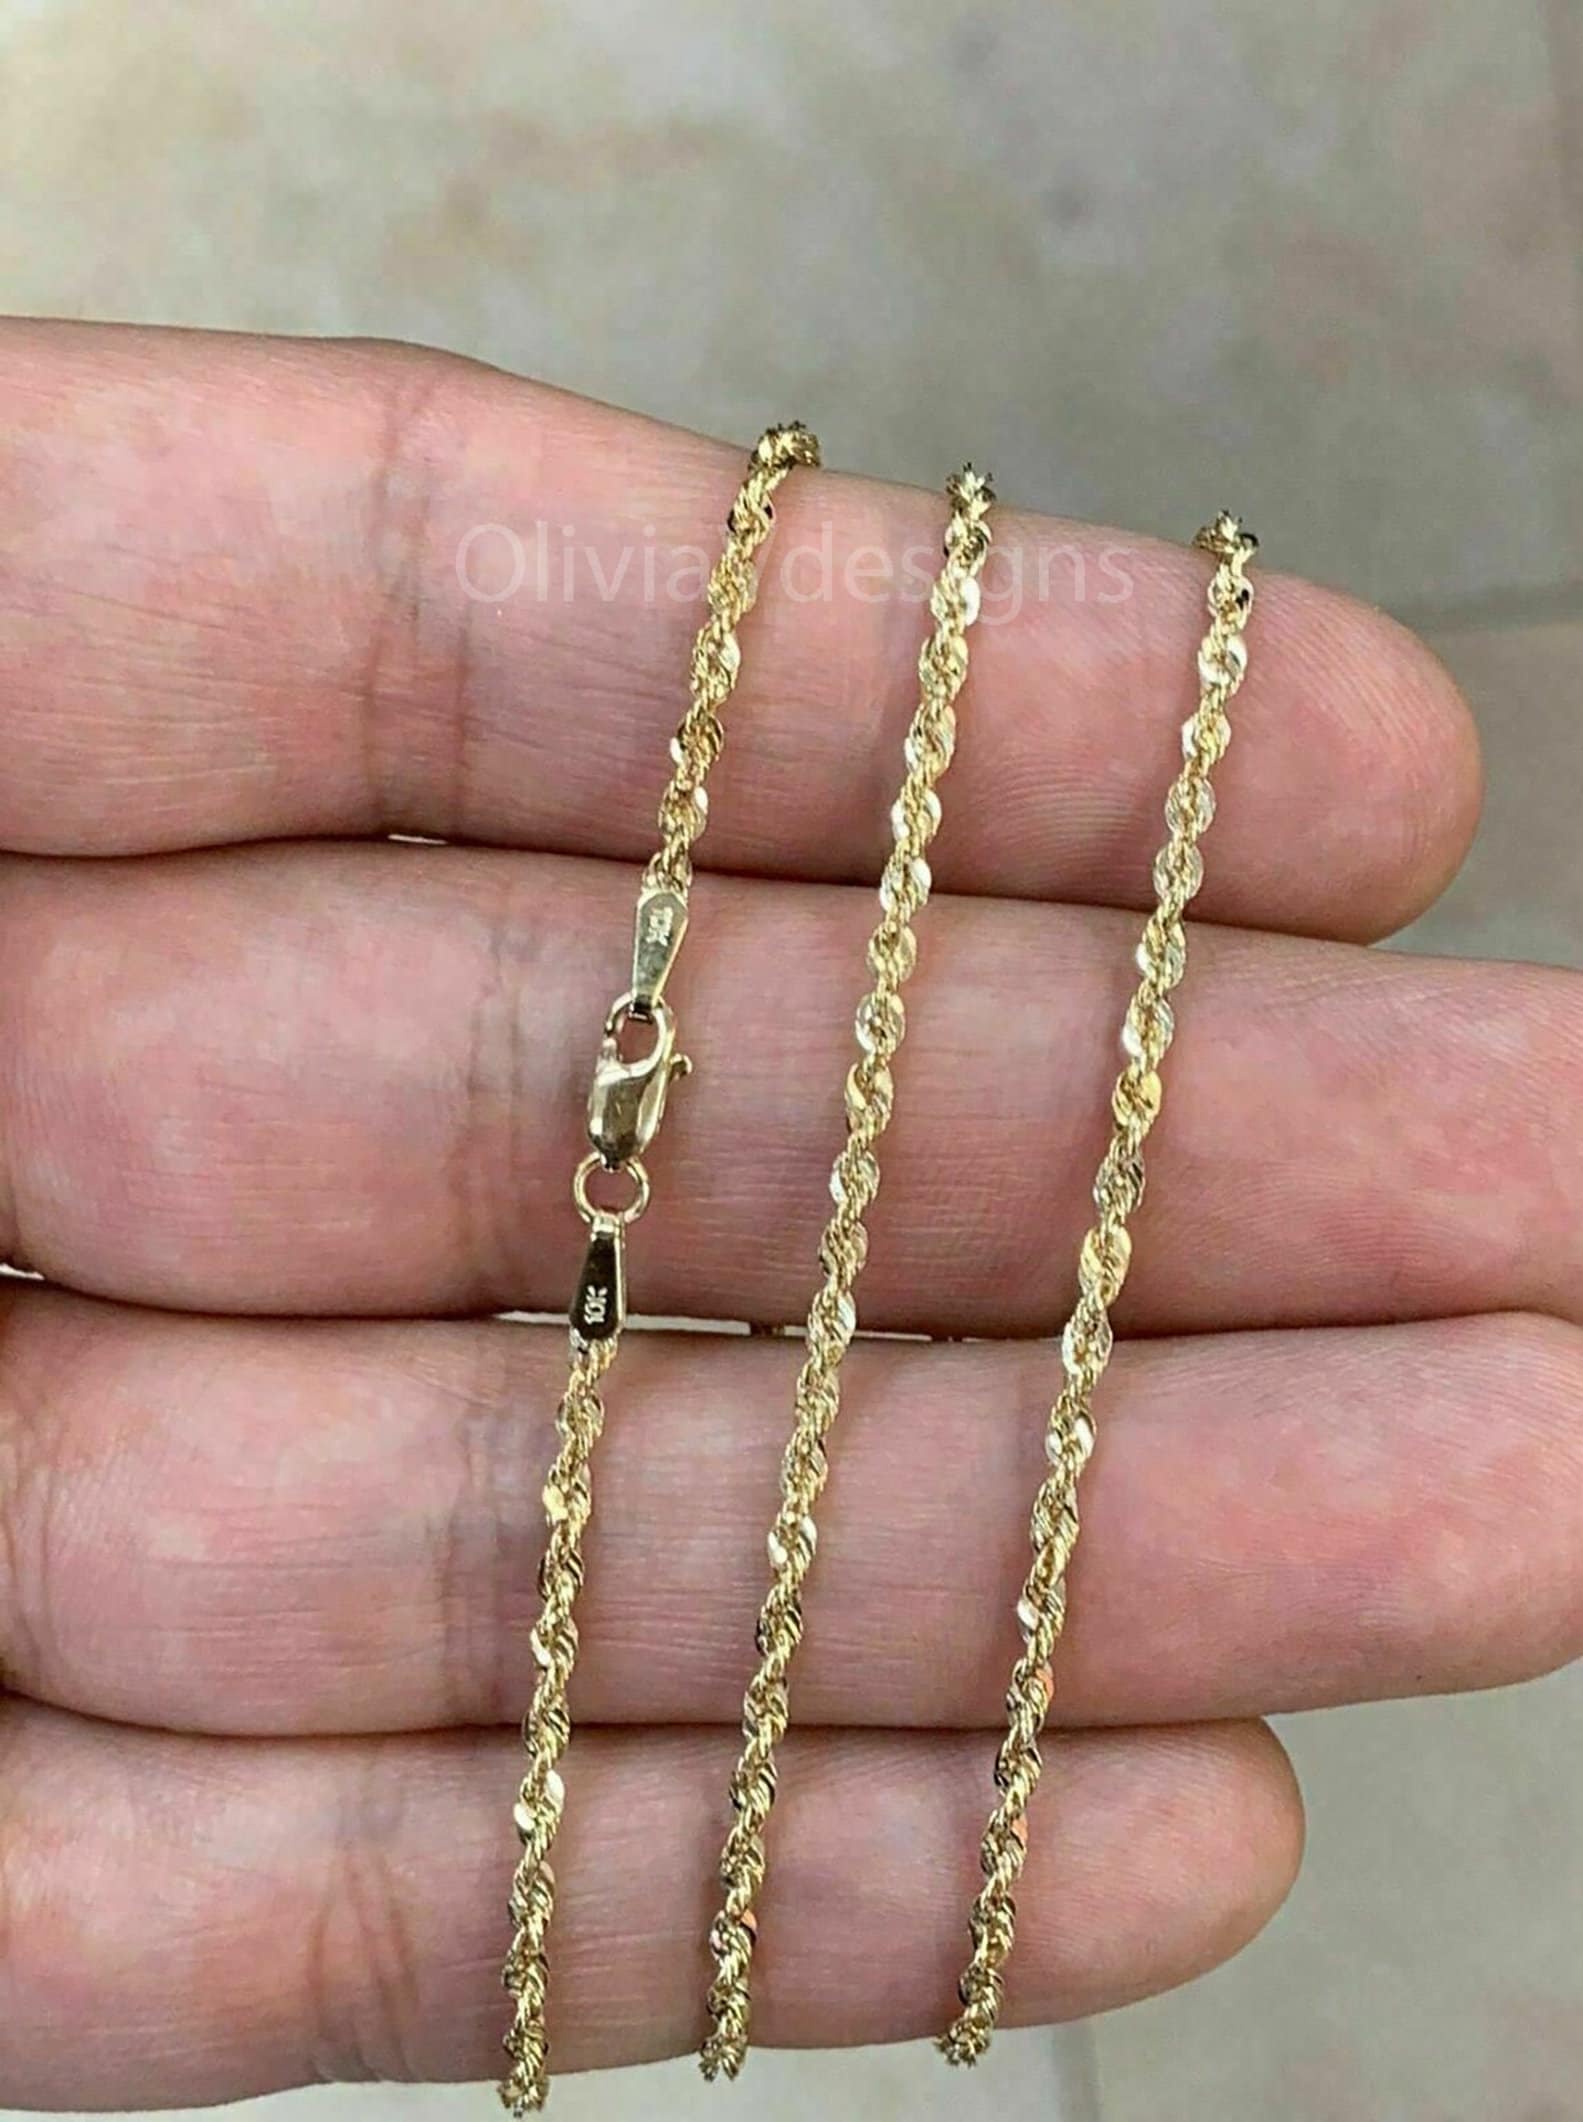 10K Solid Yellow Gold Diamond Cut Singapore Chain Necklace 10KT Real Gold NEW!!